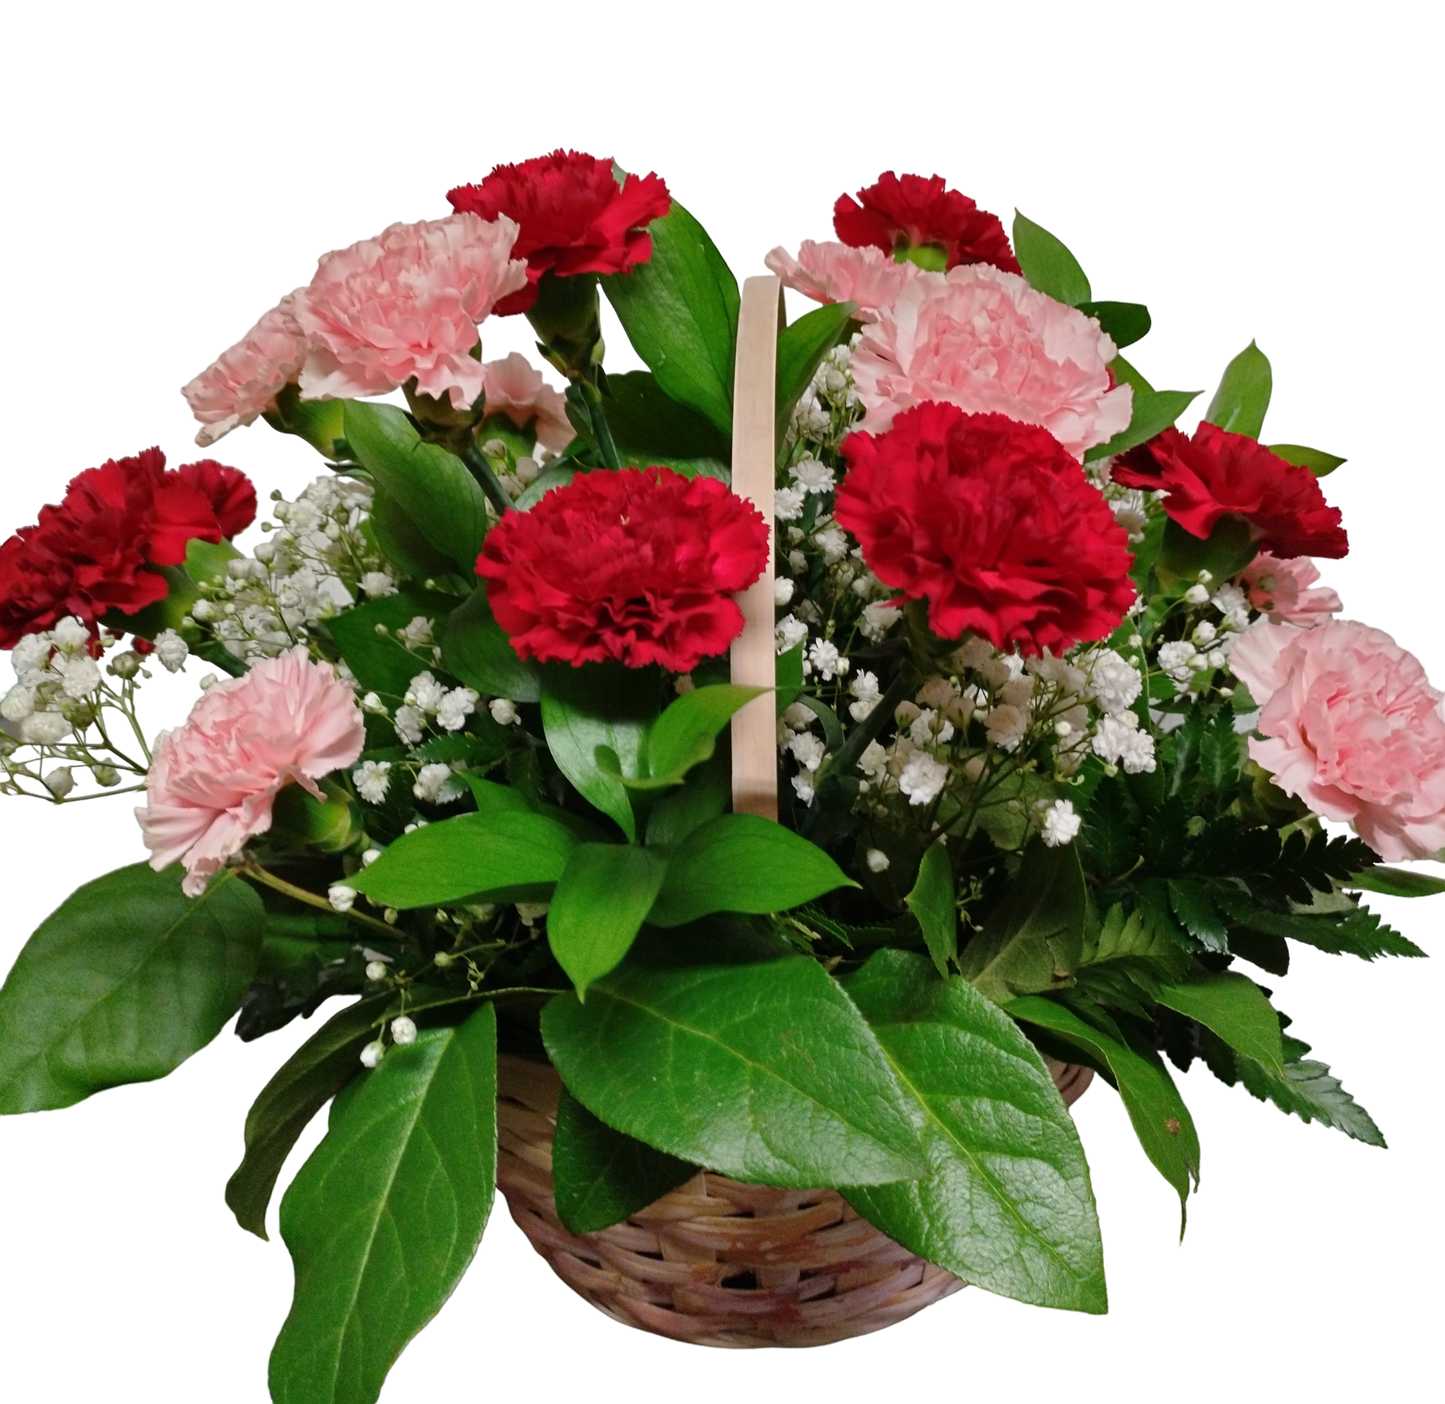 Red and Pink Carnation Basket